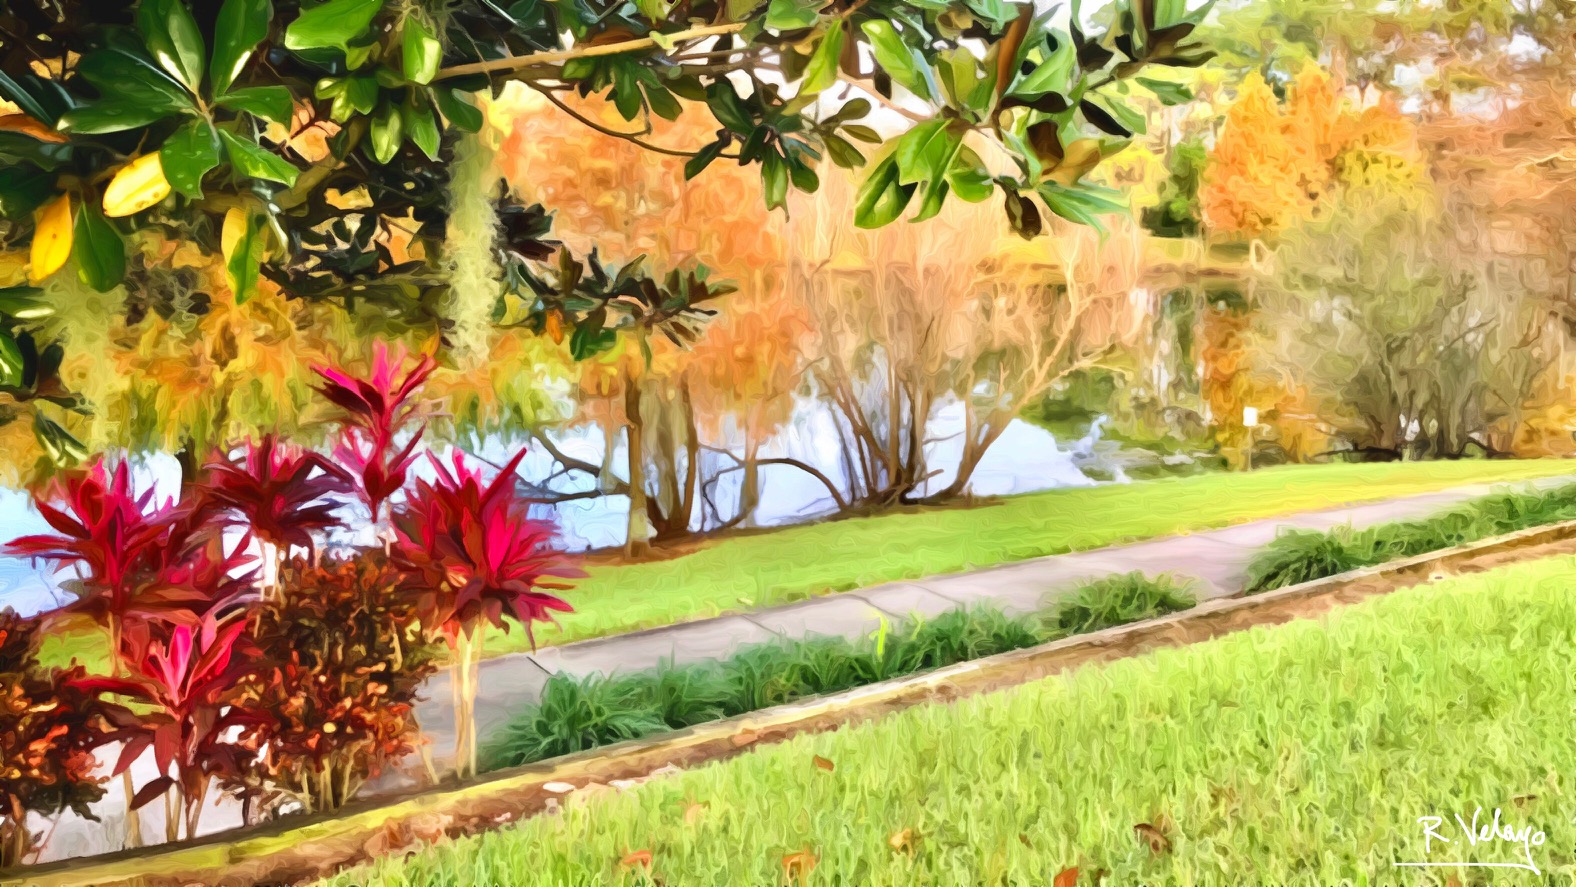 "NATURE TRAIL PATH BY THE POND AT BAHAMA BAY" [Created: 4/23/2022]